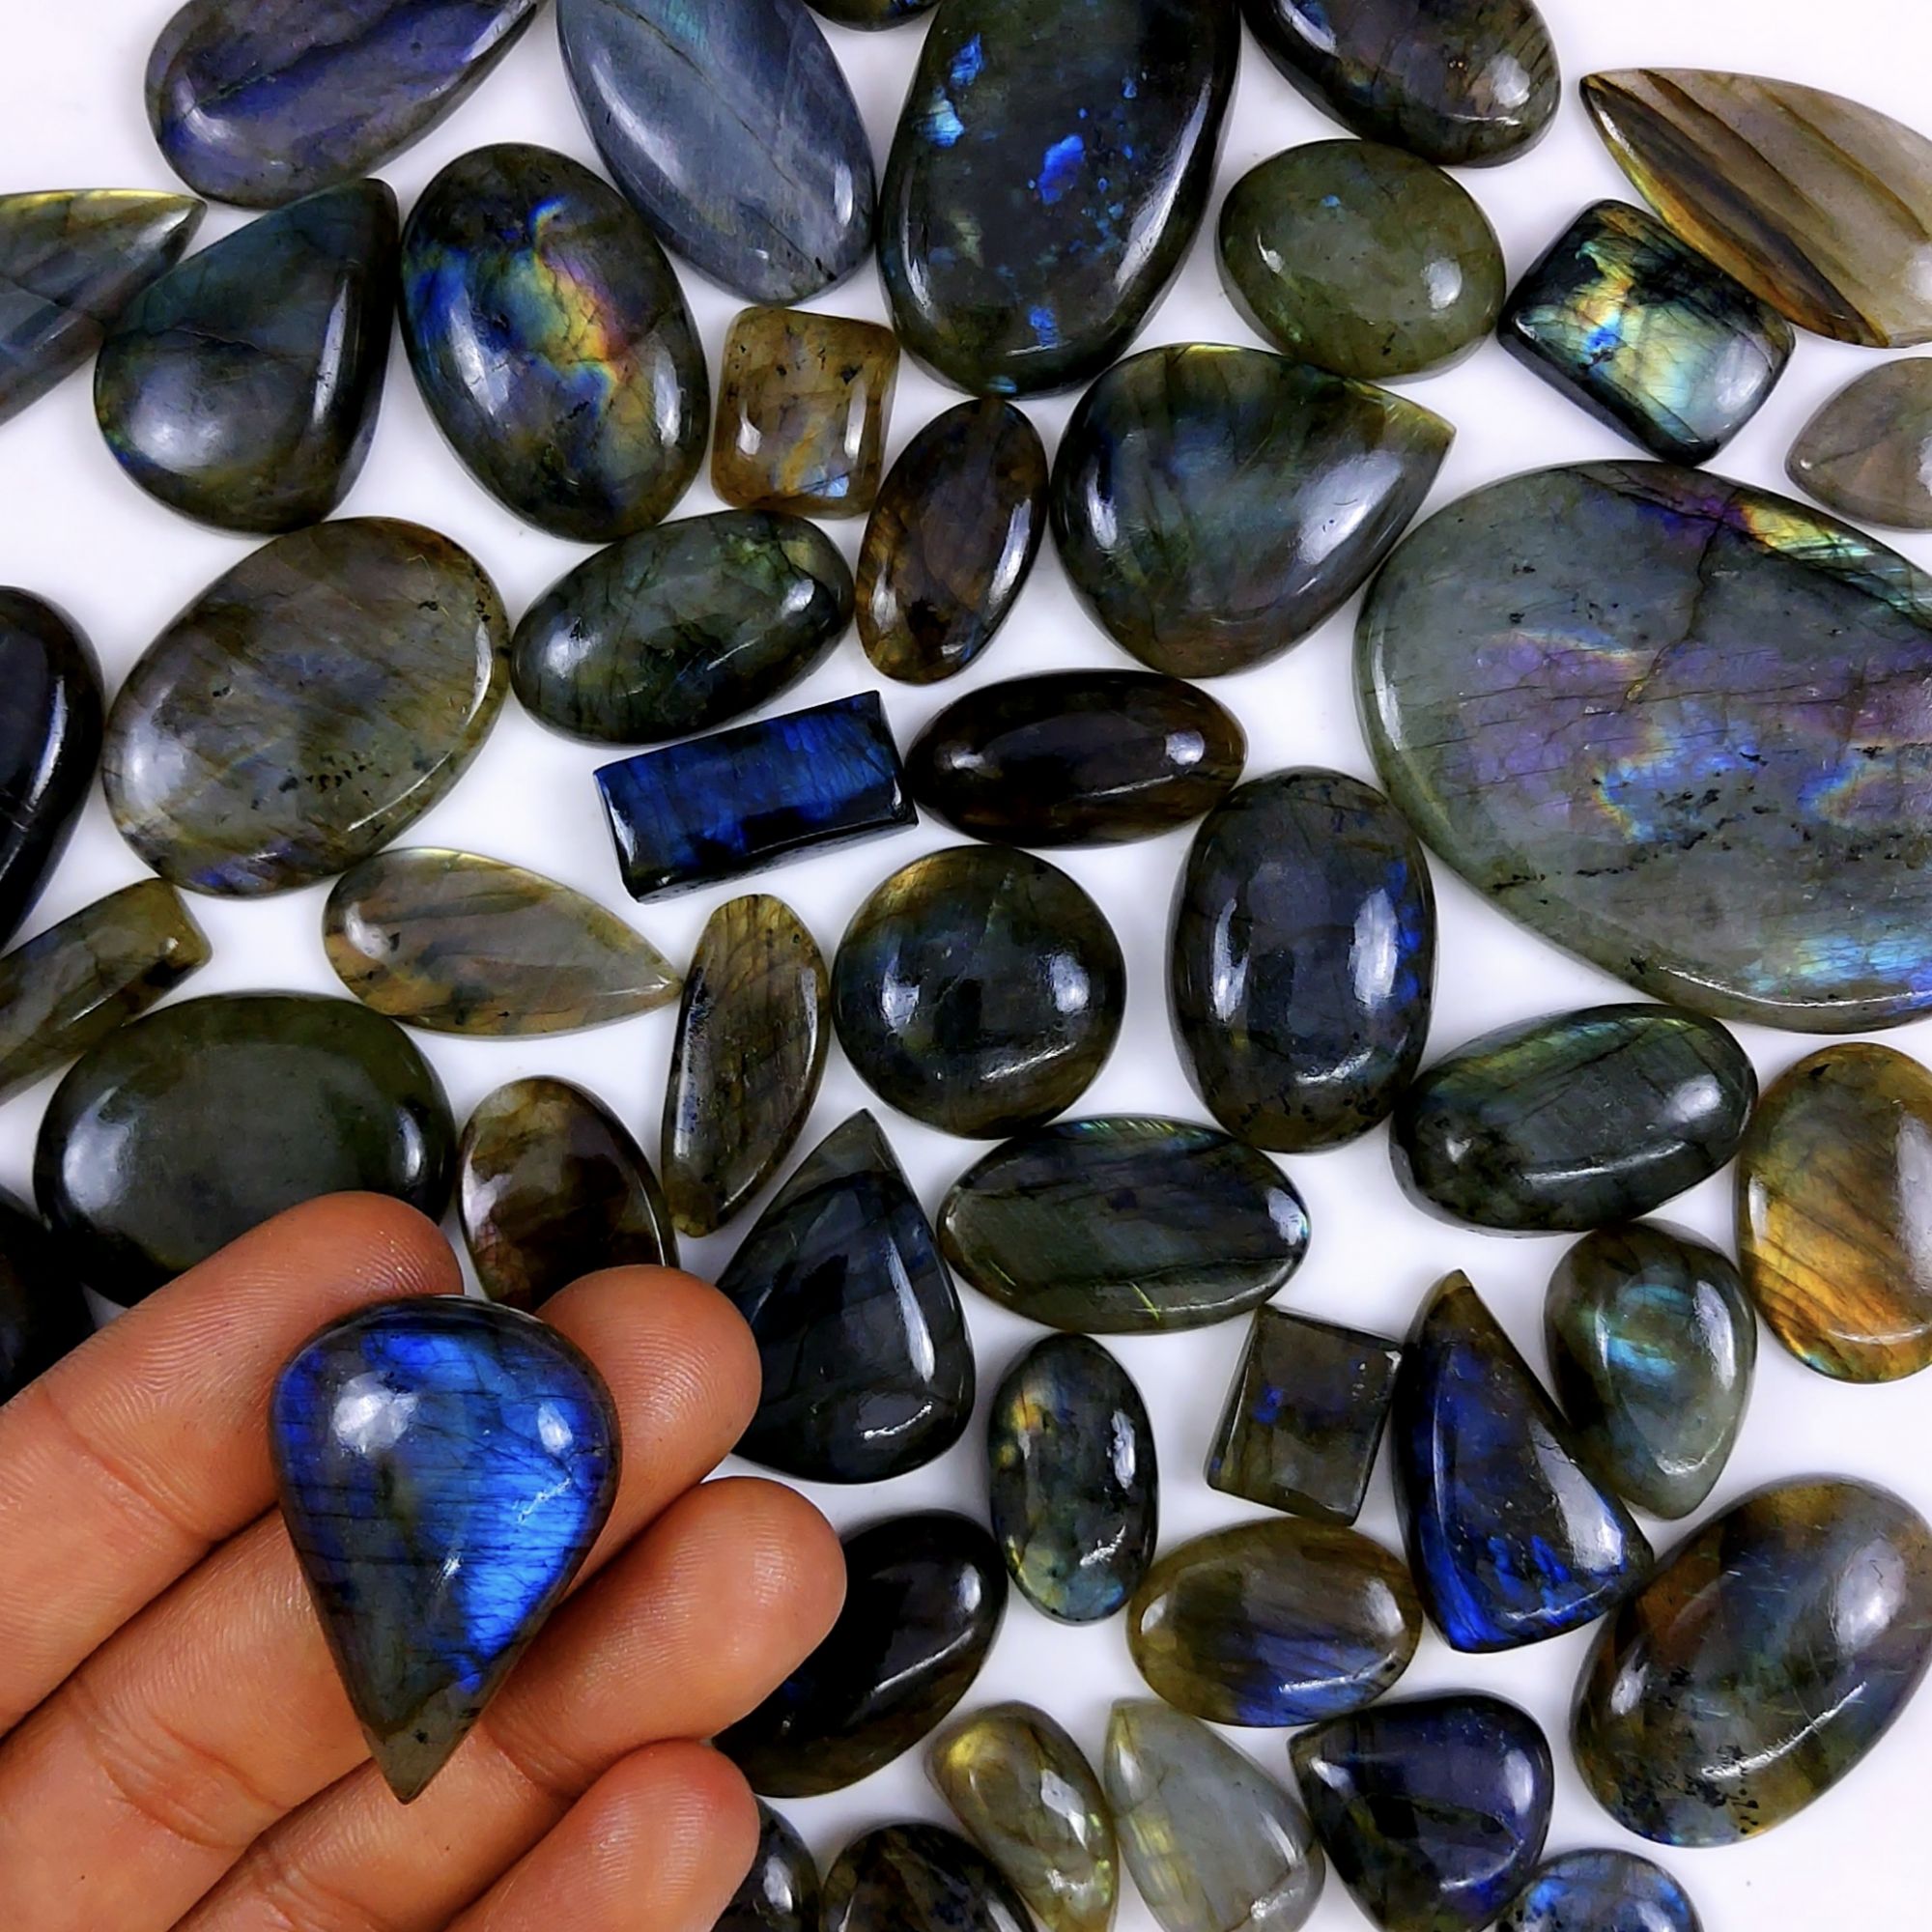 50pc 1728Cts Labradorite Cabochon Multifire Healing Crystal For Jewelry Supplies, Labradorite Necklace Handmade Wire Wrapped Gemstone Pendant 60x45 20x16mm#6373